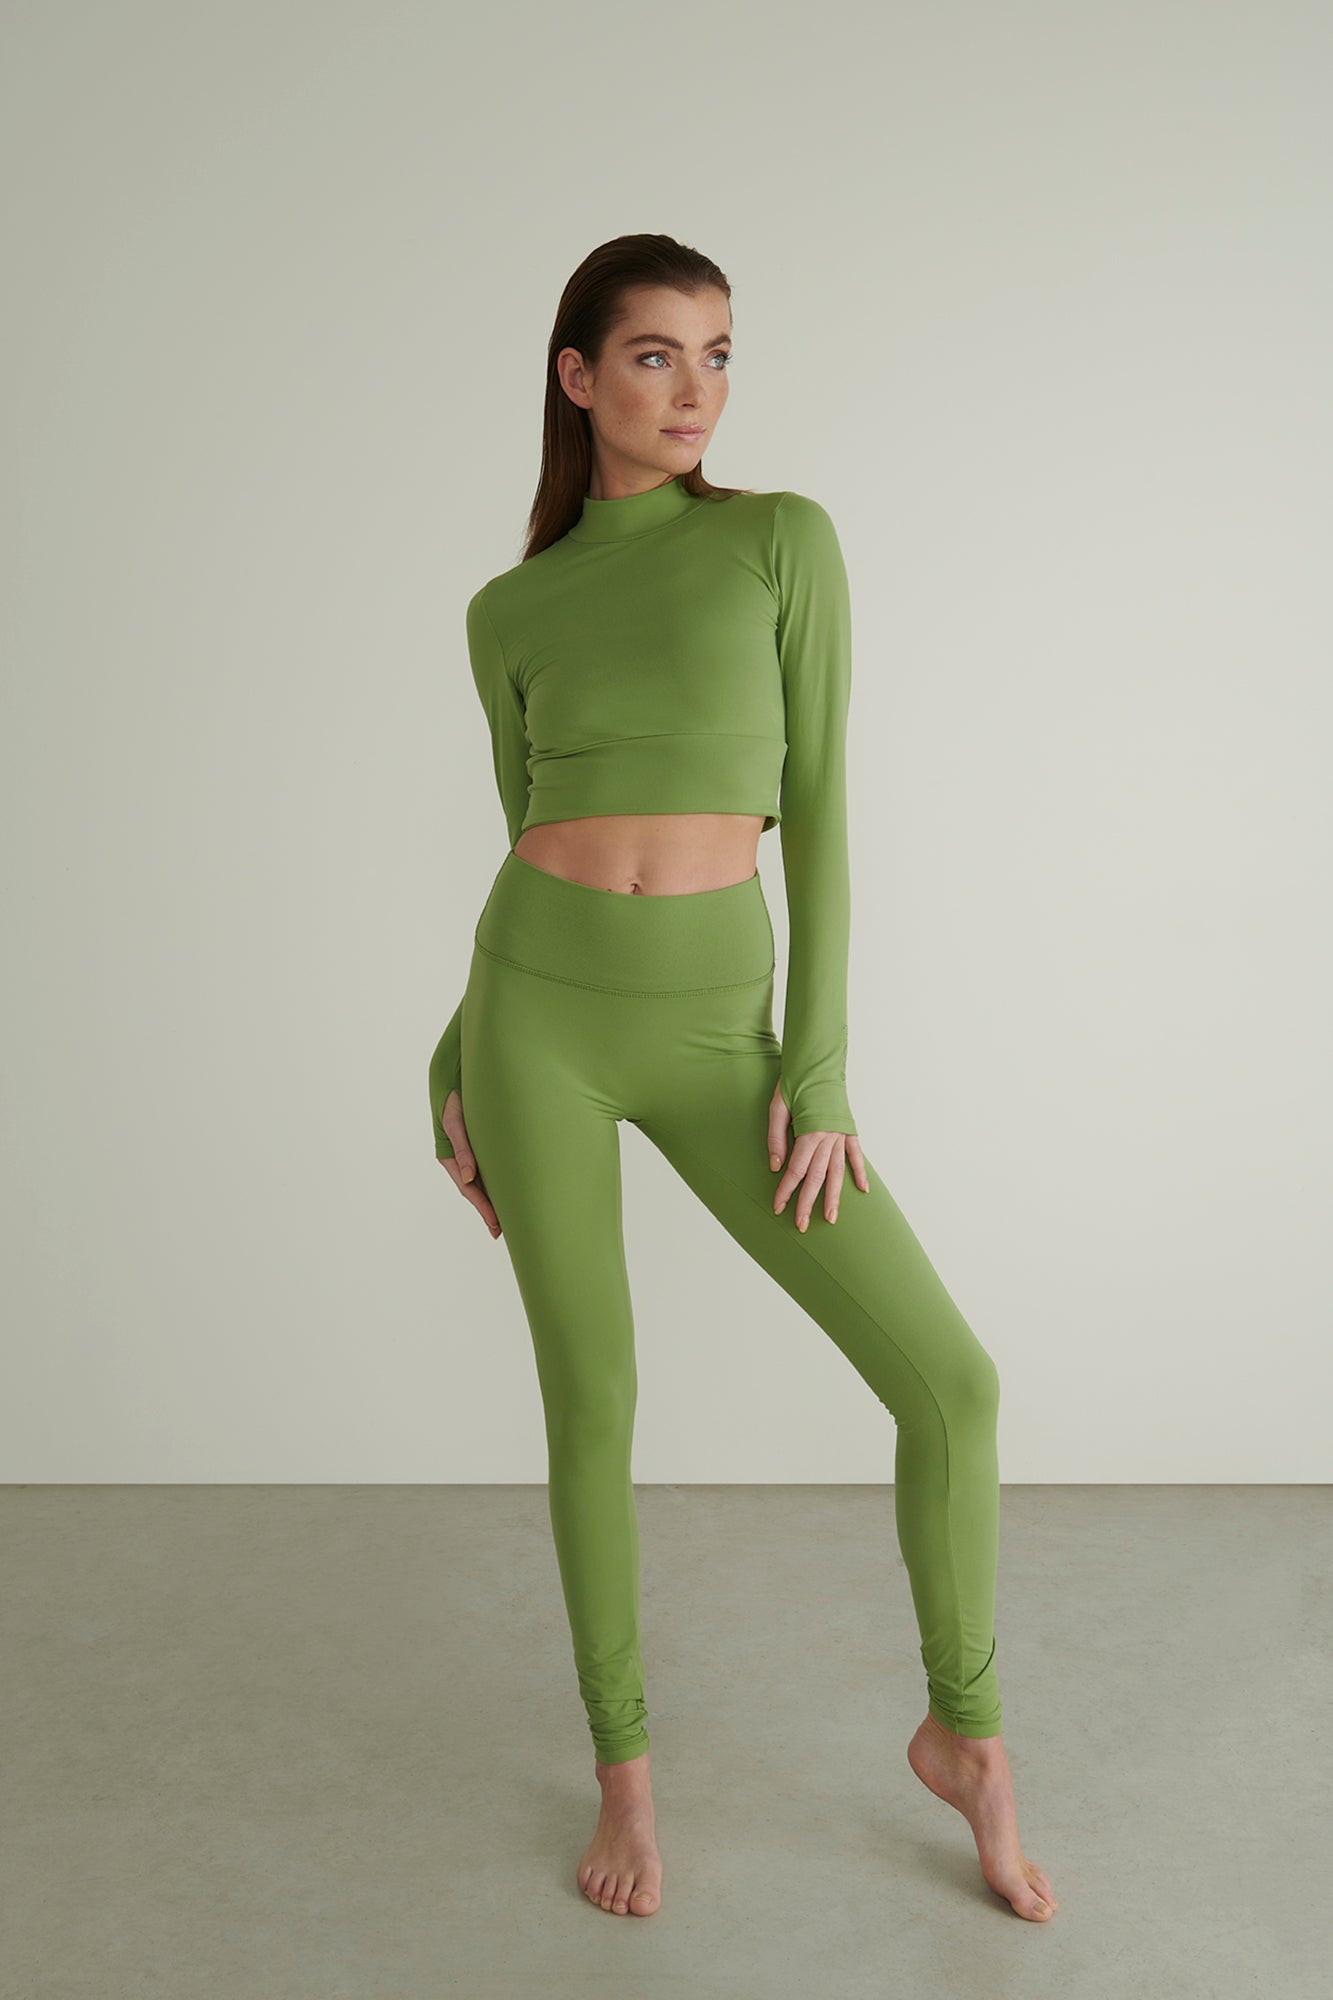 Model Wearing the Green Vital Outfit